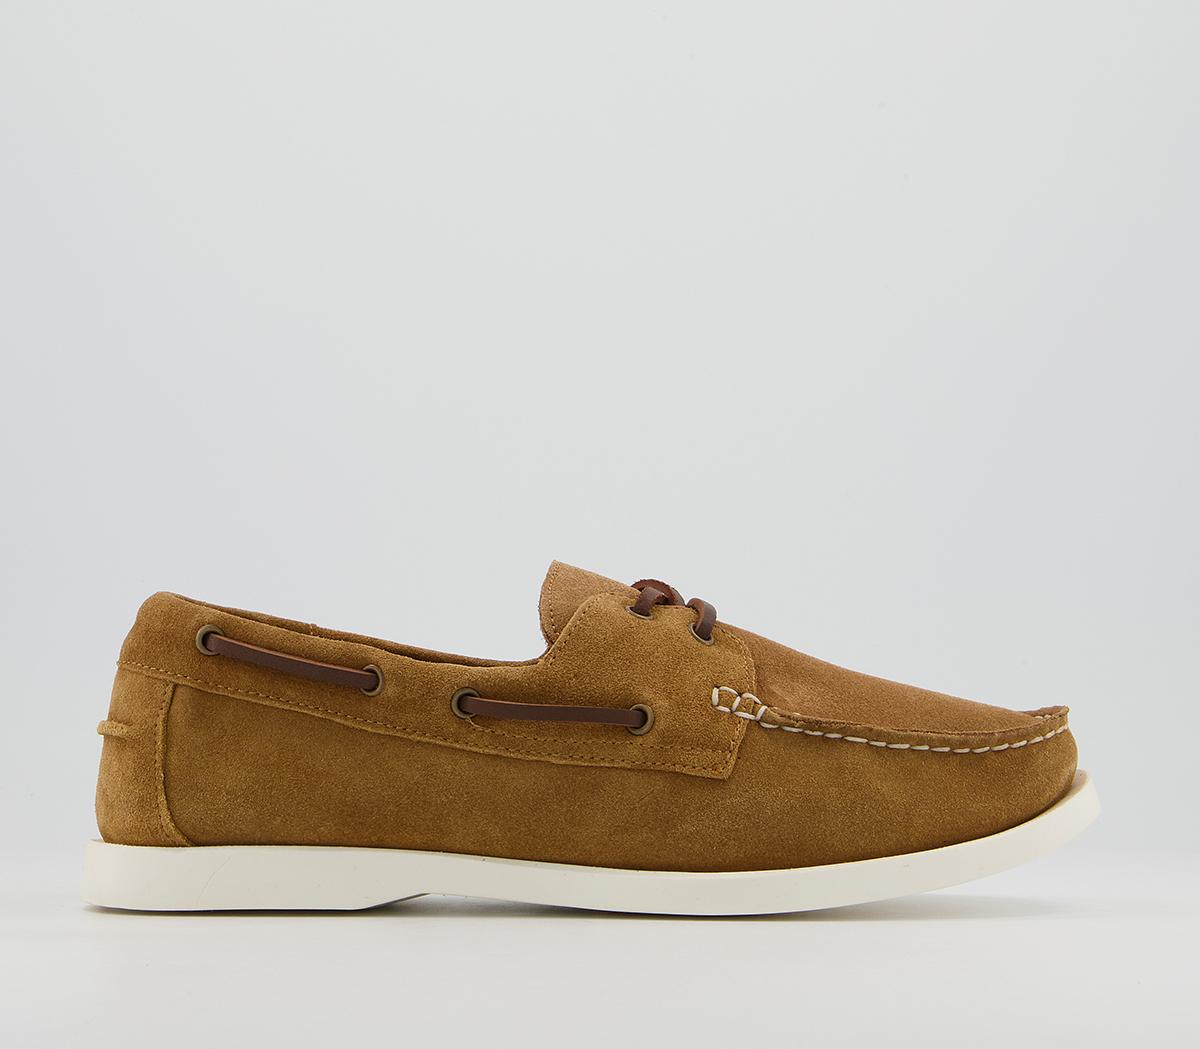 OFFICE Cabin Boat Shoes Tan Suede - Men's Casual Shoes